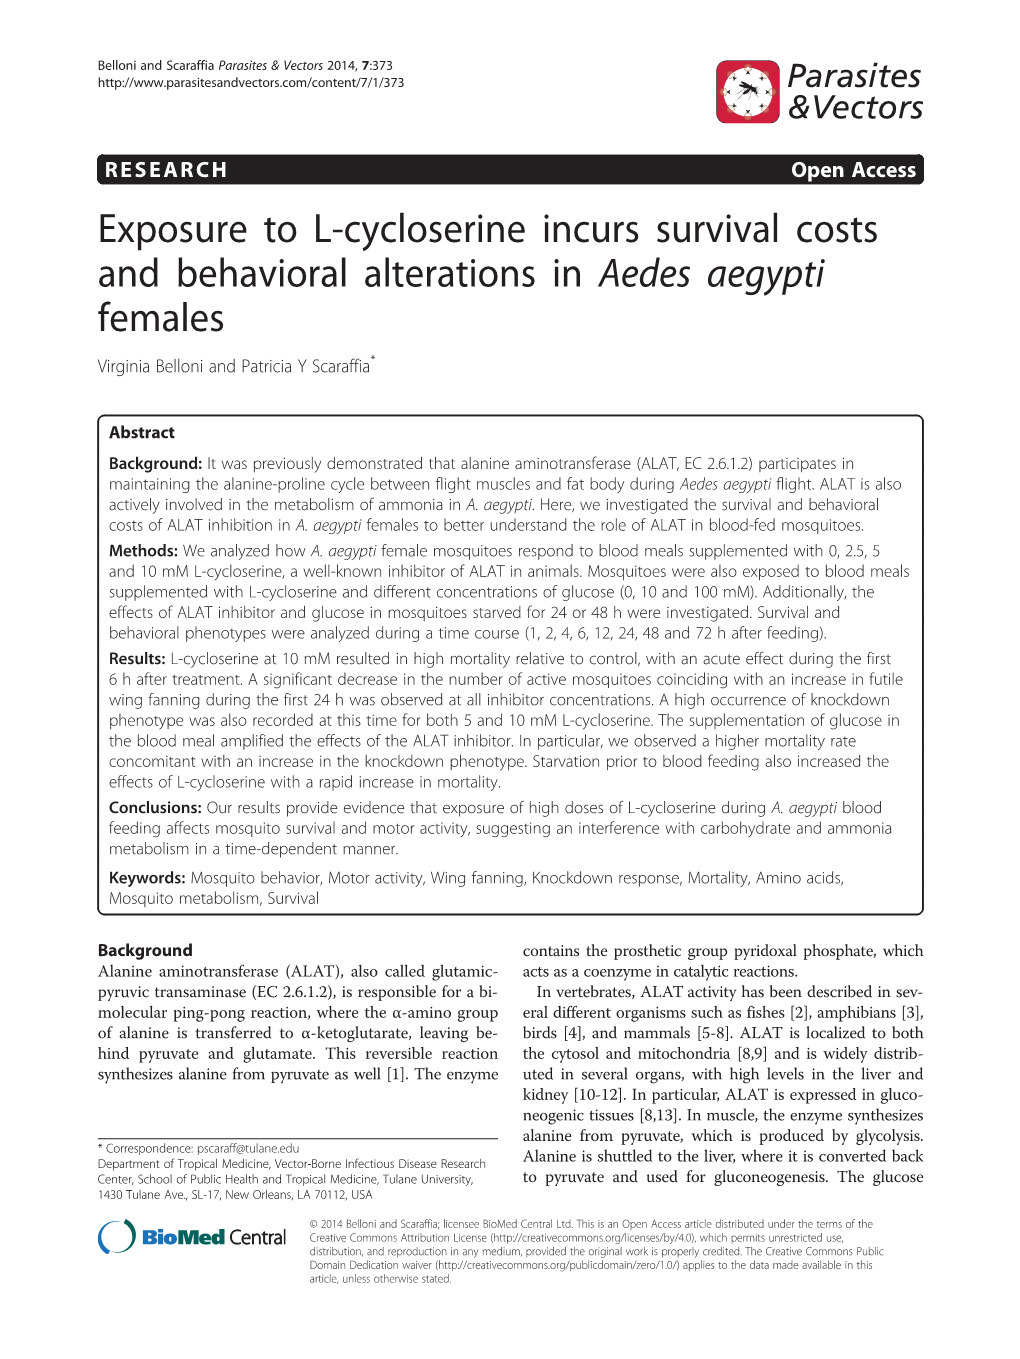 Exposure to L-Cycloserine Incurs Survival Costs and Behavioral Alterations in Aedes Aegypti Females Virginia Belloni and Patricia Y Scaraffia*